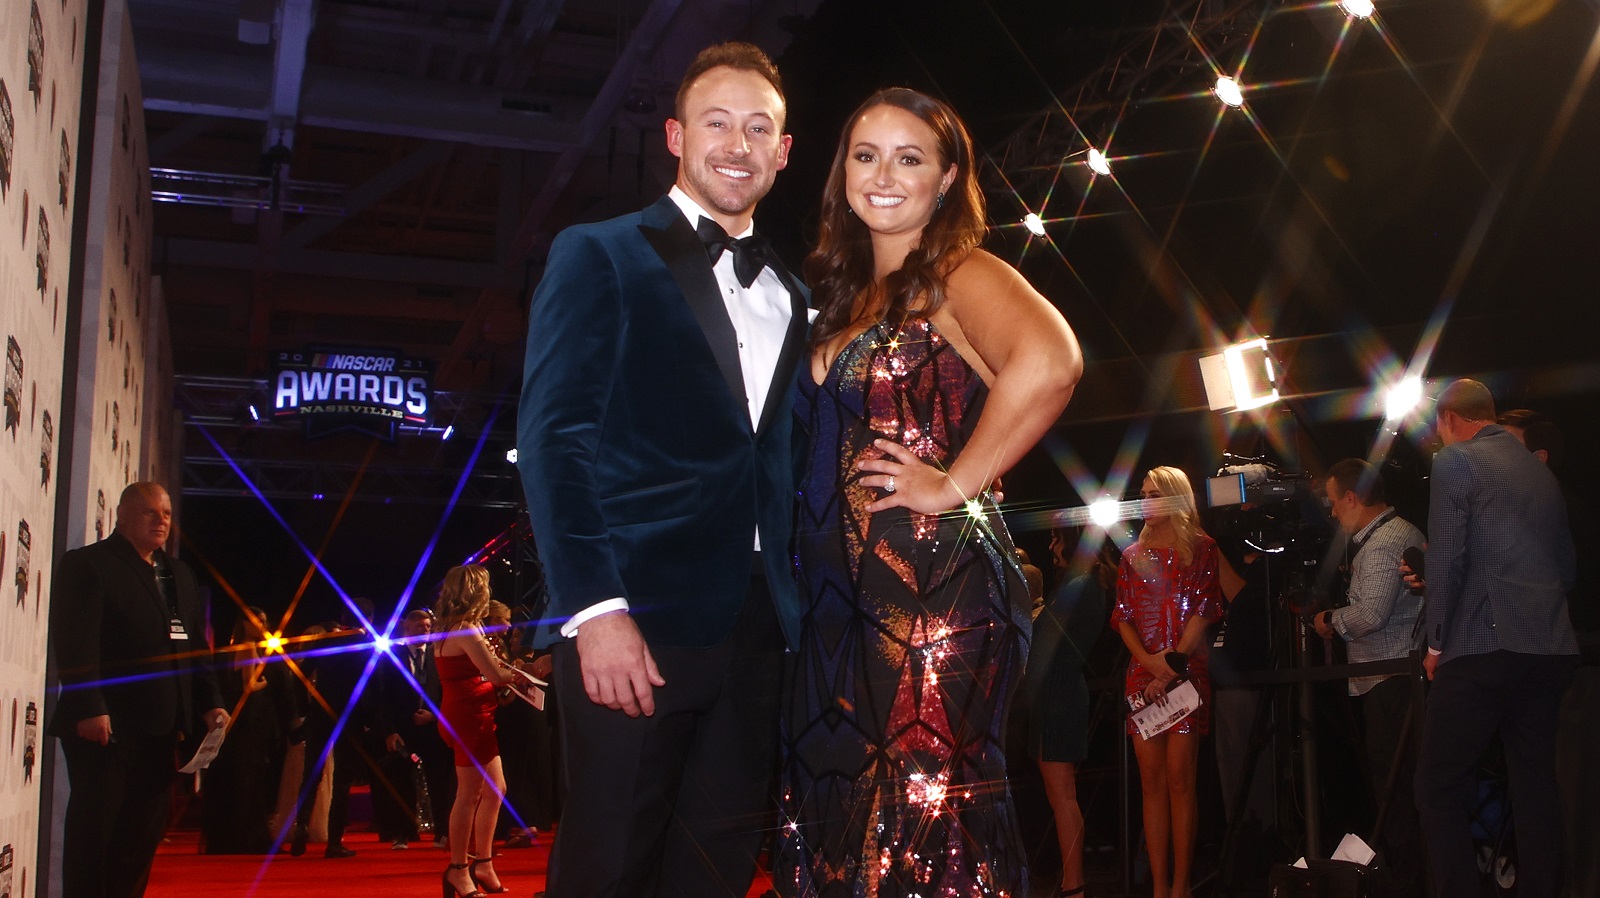 NASCAR Xfinity Series champion Daniel Hemric and his wife Kenzie Hemric pose on the red carpet prior to the NASCAR Champions Banquet on Dec. 2, 2021, in Nashville, Tennessee. | Jared C. Tilton/Getty Images